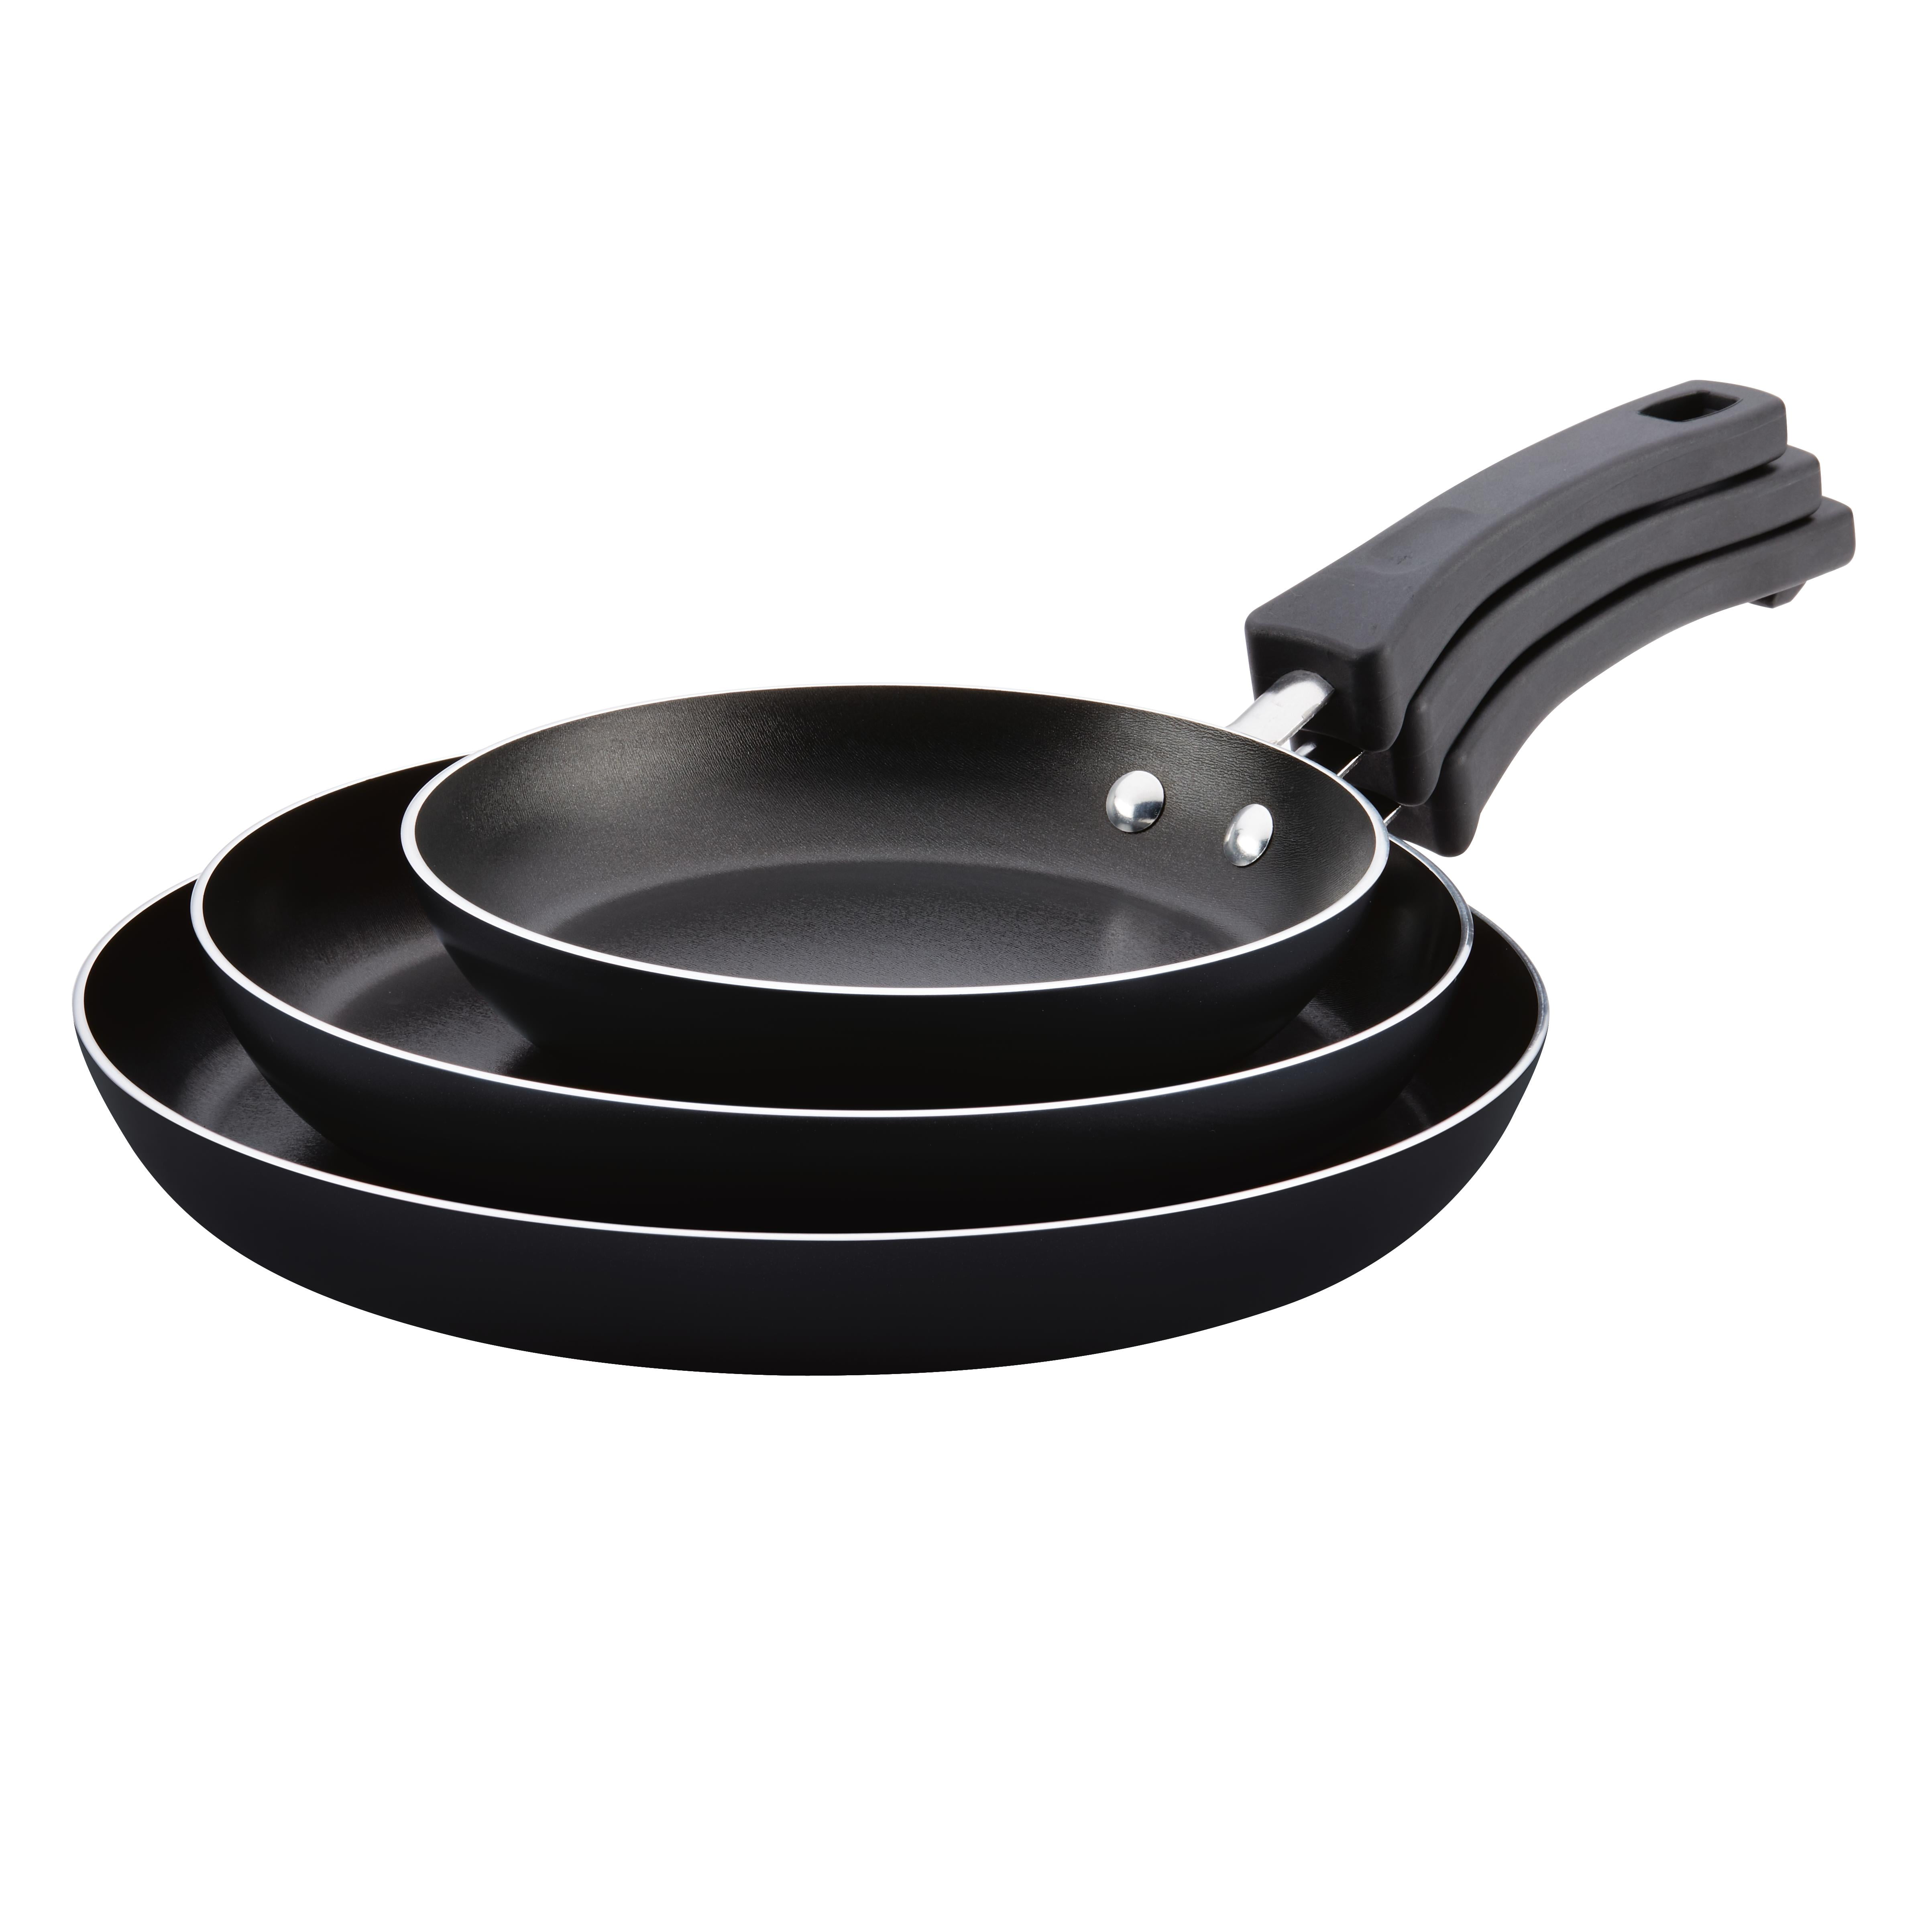 New WearEver 8 Frying Pan - Non-Stick - Controlled Cooking - Concentric Air